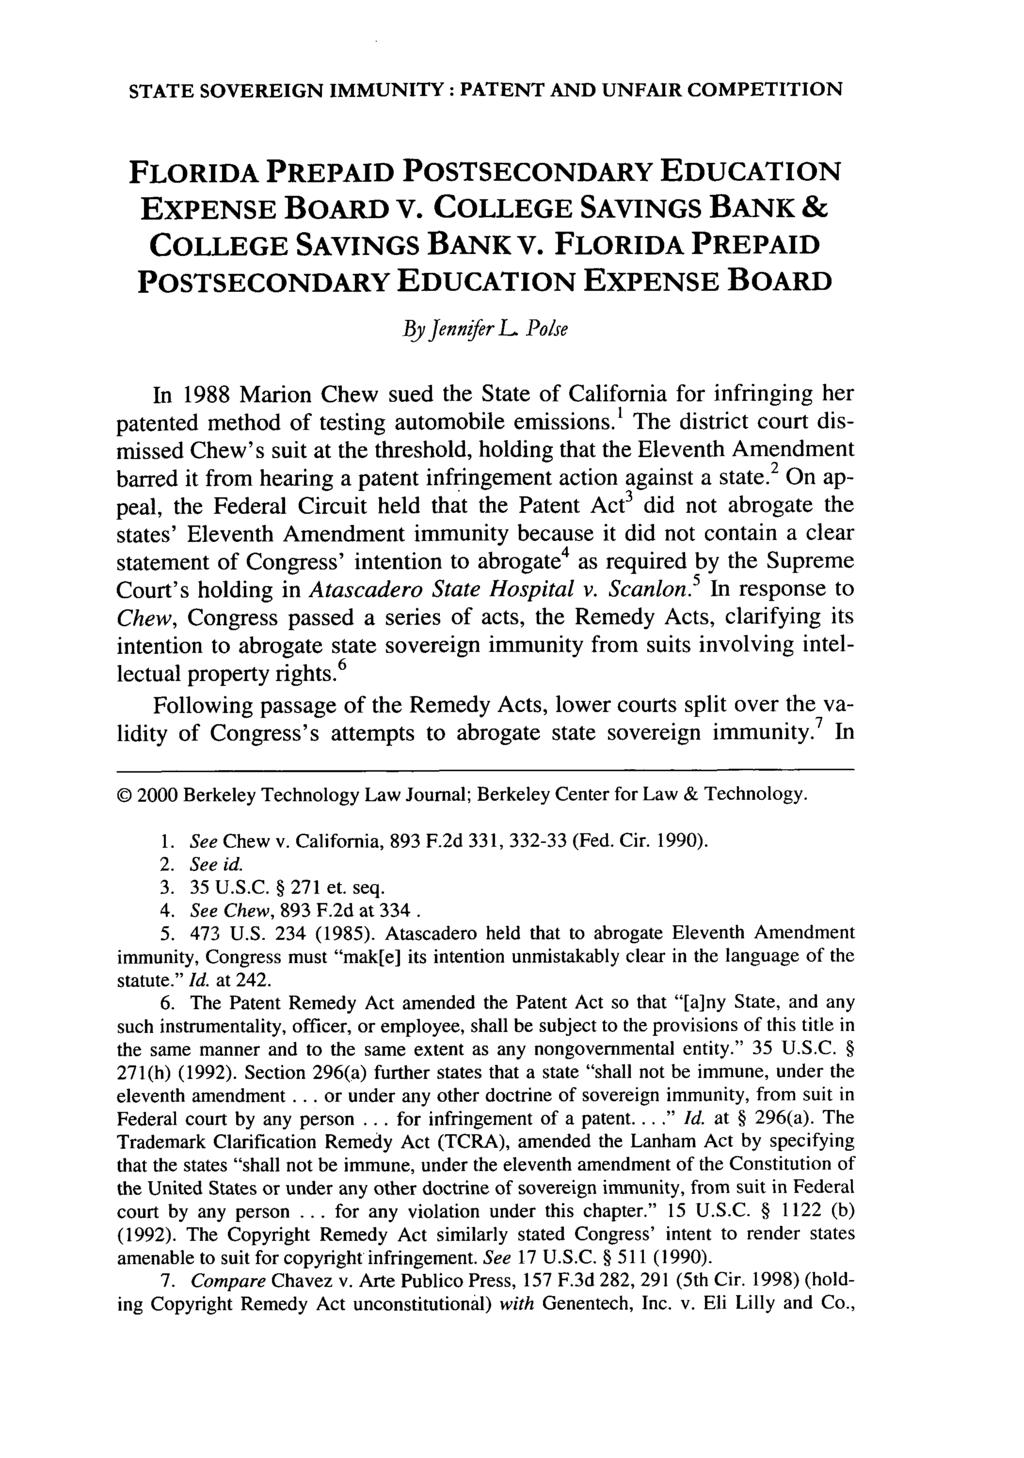 STATE SOVEREIGN IMMUNITY: PATENT AND UNFAIR COMPETITION FLORIDA PREPAID POSTSECONDARY EDUCATION EXPENSE BOARD v. COLLEGE SAVINGS BANK & COLLEGE SAVINGS BANK V.